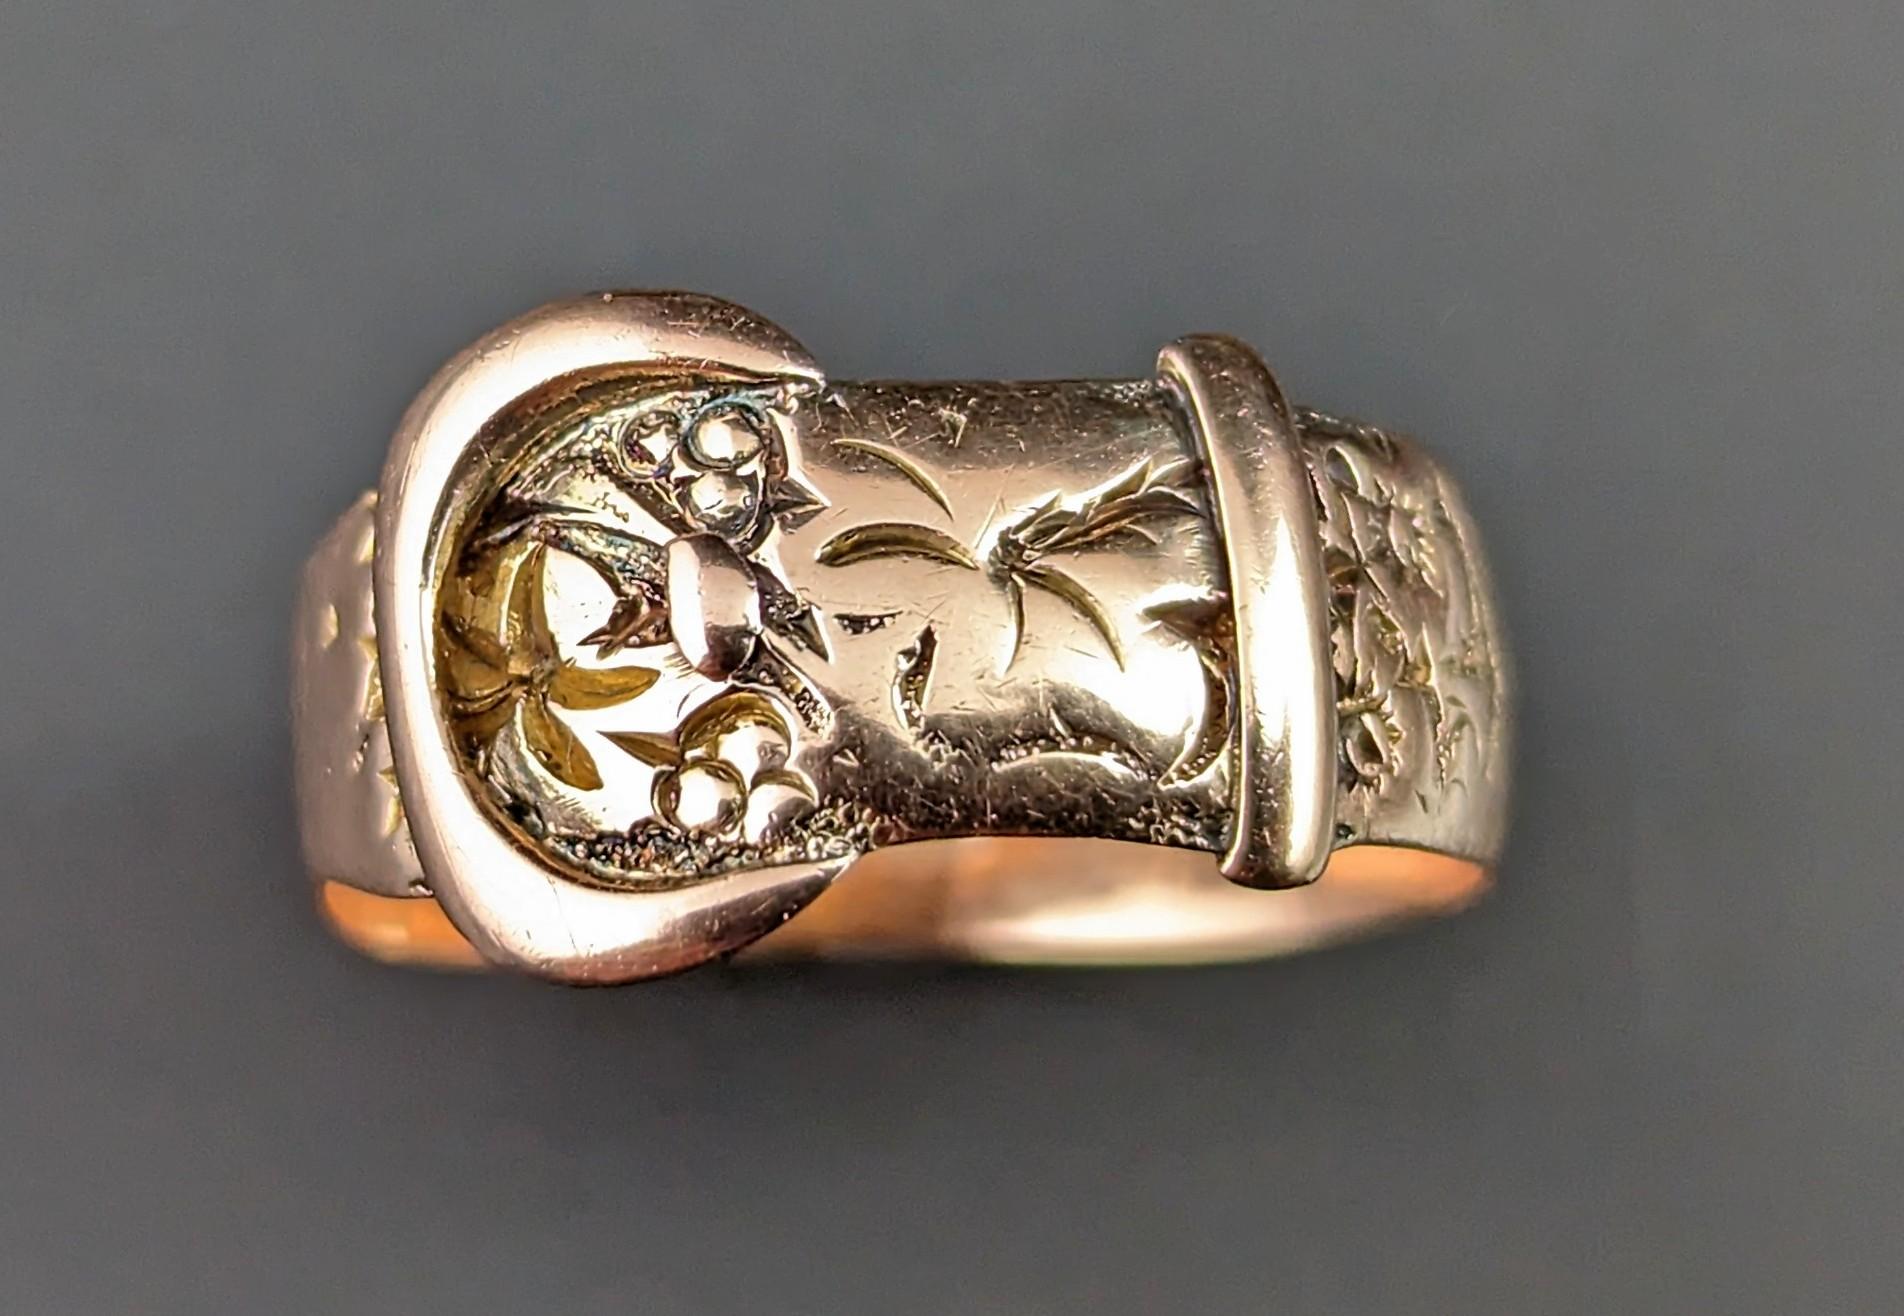 You can't help but be charmed by these old gold buckle rings.

This Art Deco era 9kt Rose gold, engraved buckle ring lends it's style from the Victorian era, the buckle ring really catapulted into popularity at that time and remained a popular